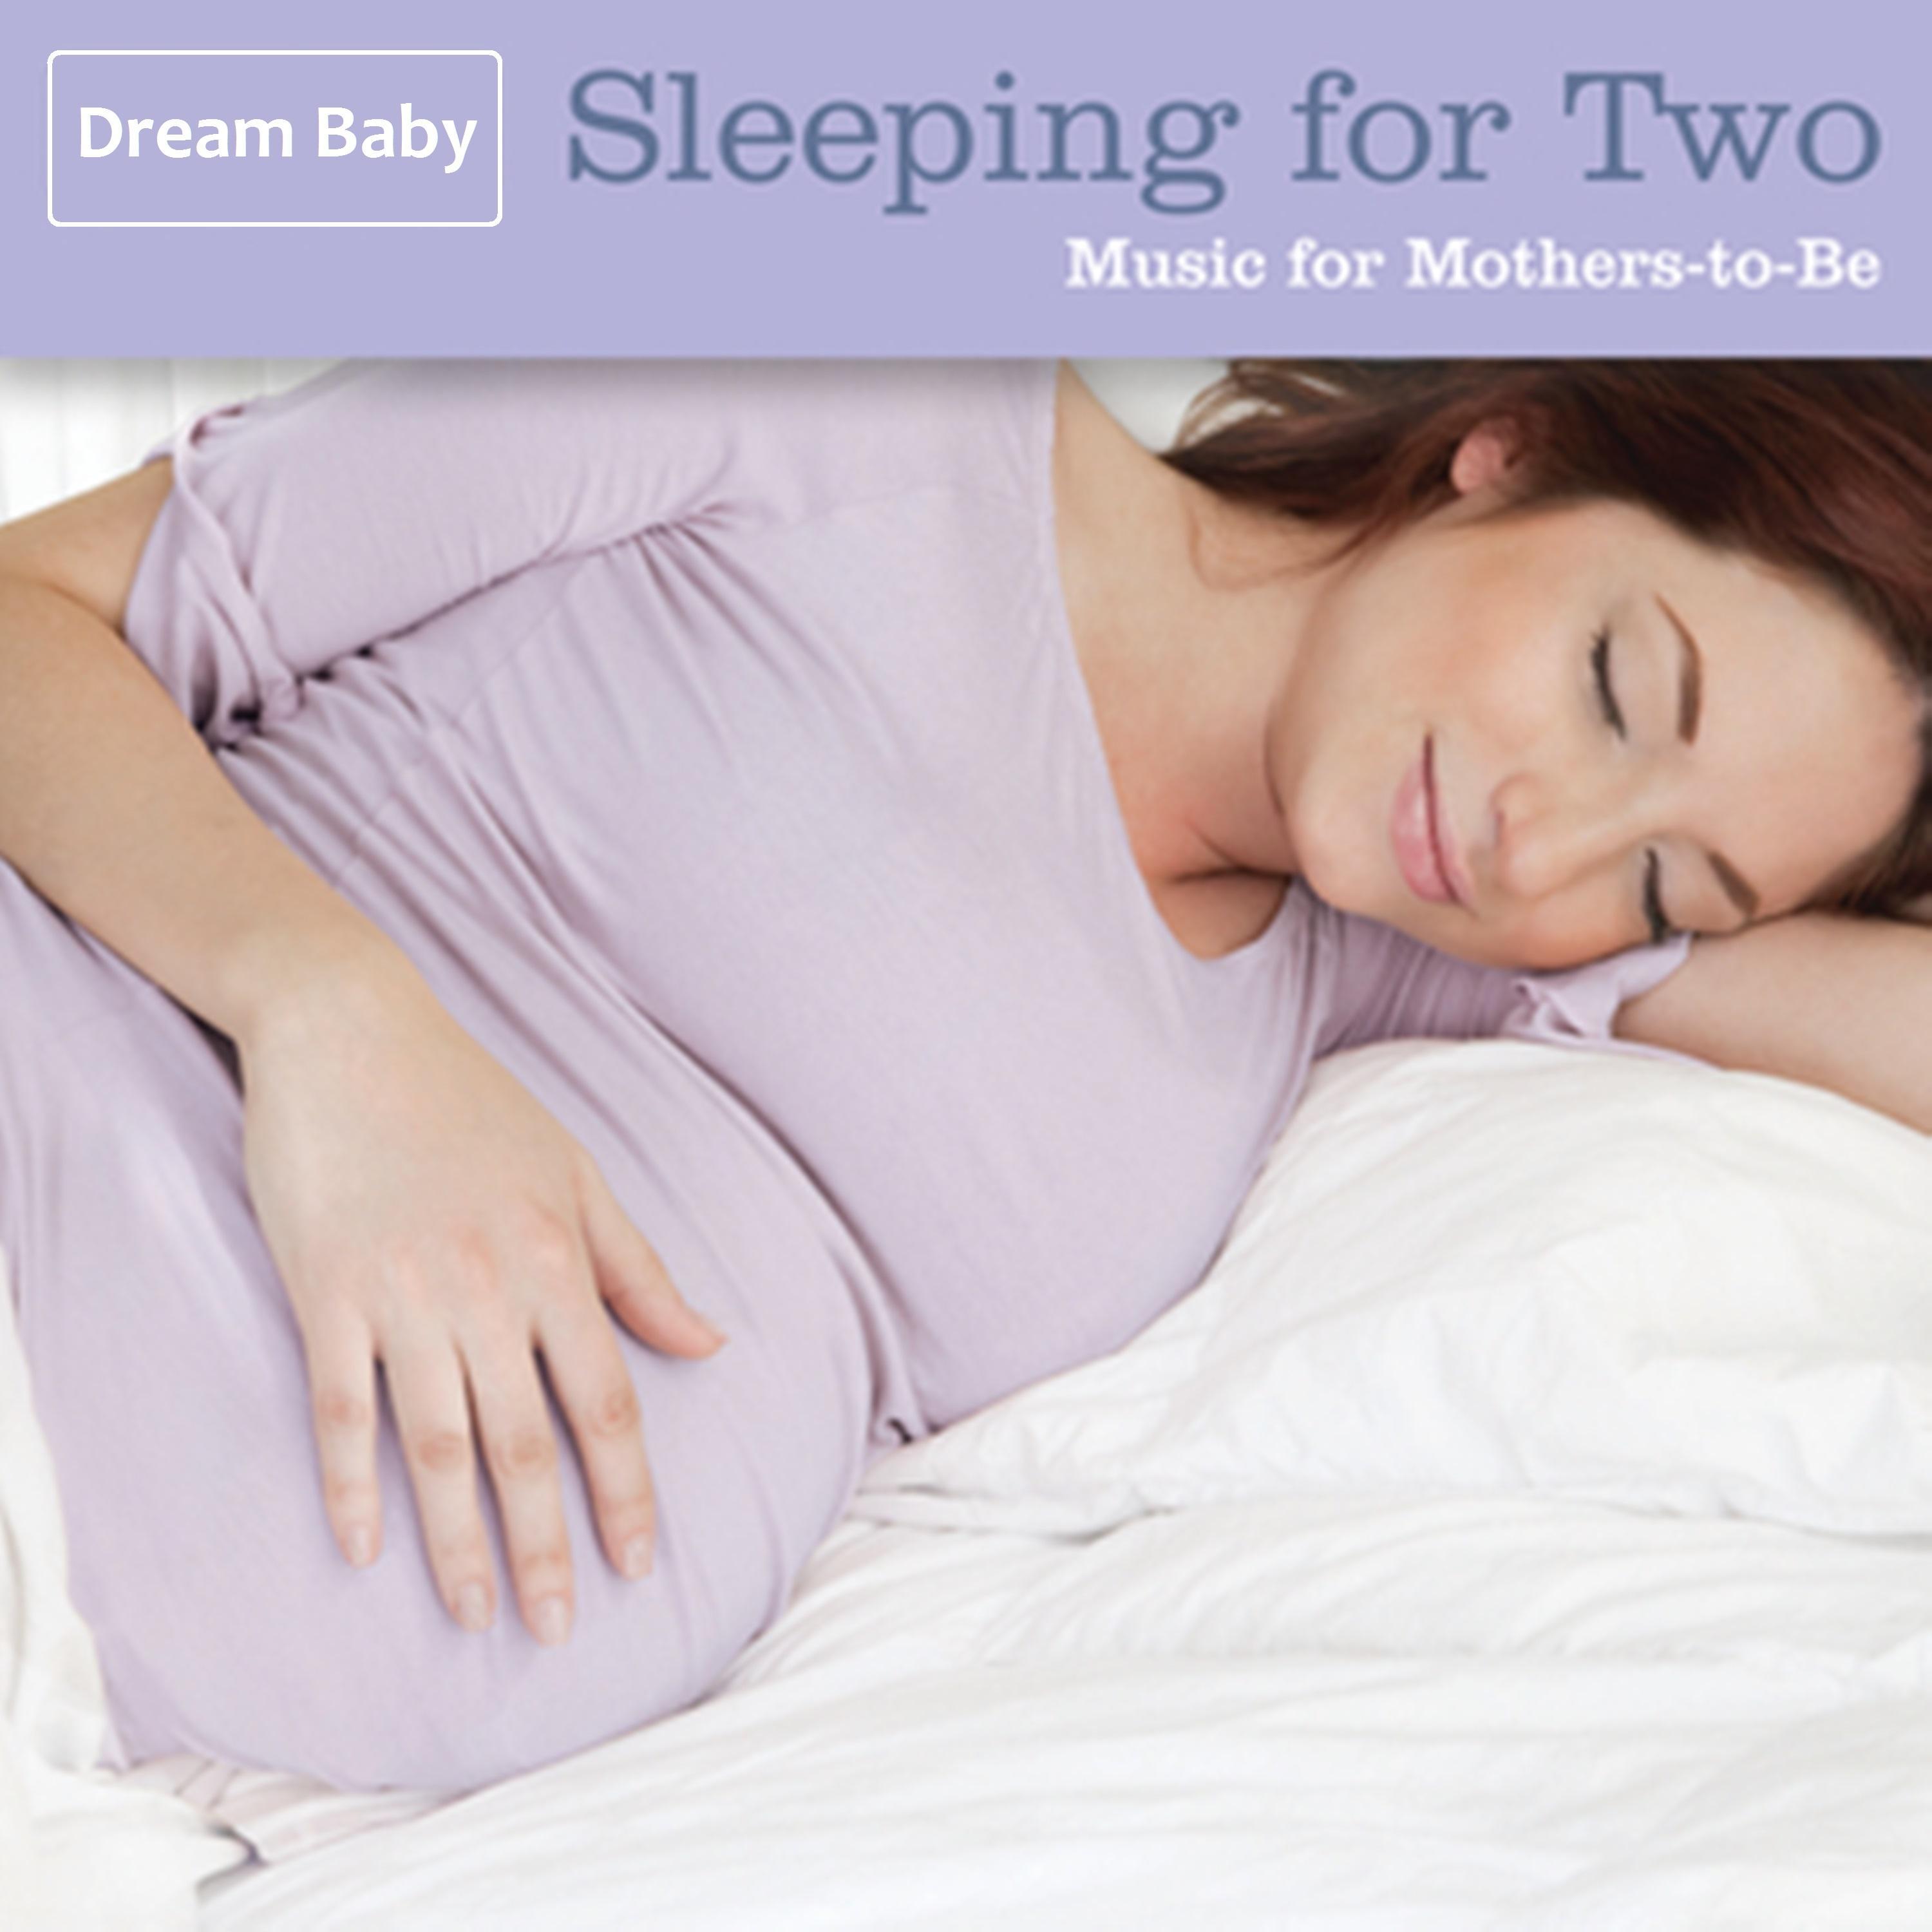 Sleeping for Two - Music for Mothers-to-Be